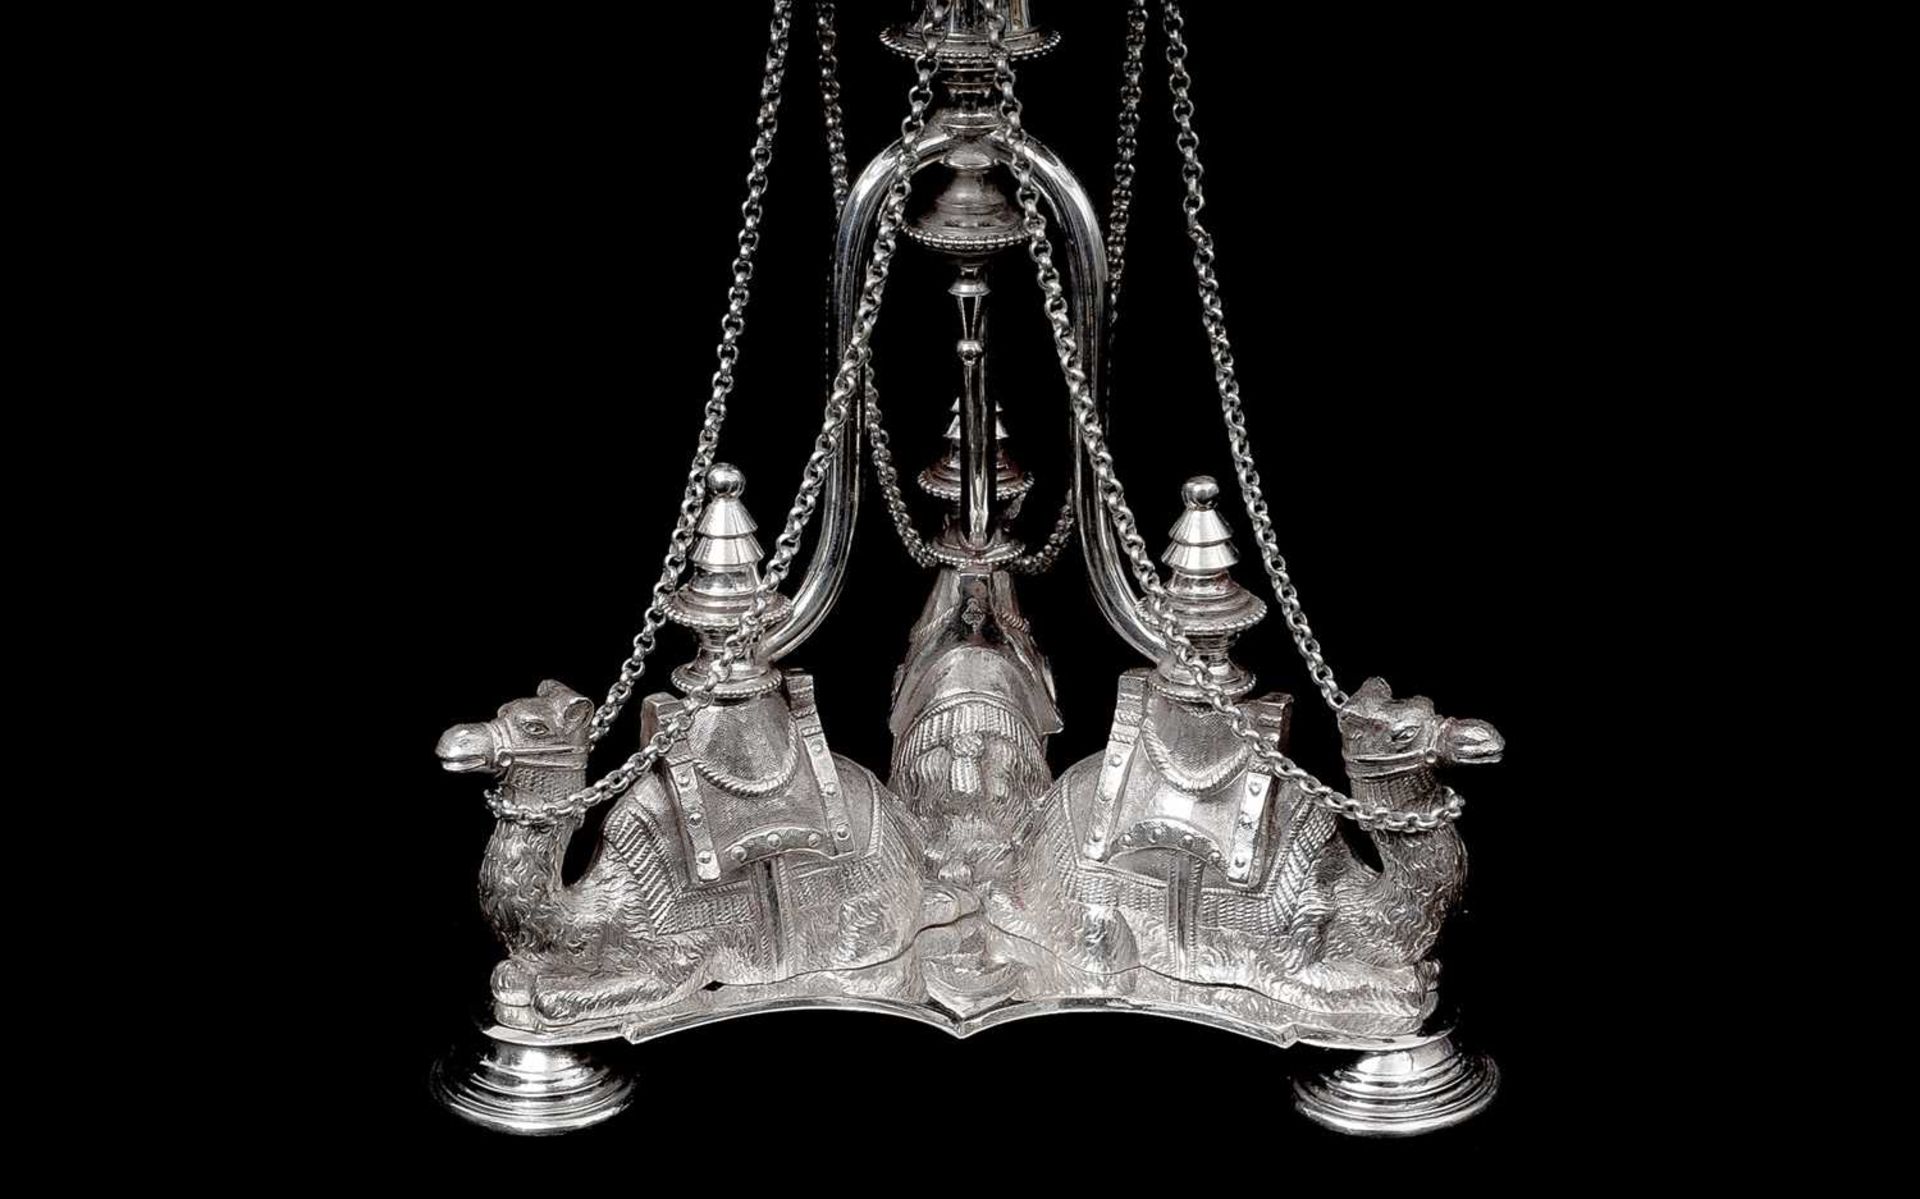 ATTRIBUTED TO ELKINGTON: A LATE 19TH CENTURY SILVER PLATED EGYPTIAN REVIVAL CENTREPIECE - Image 2 of 2